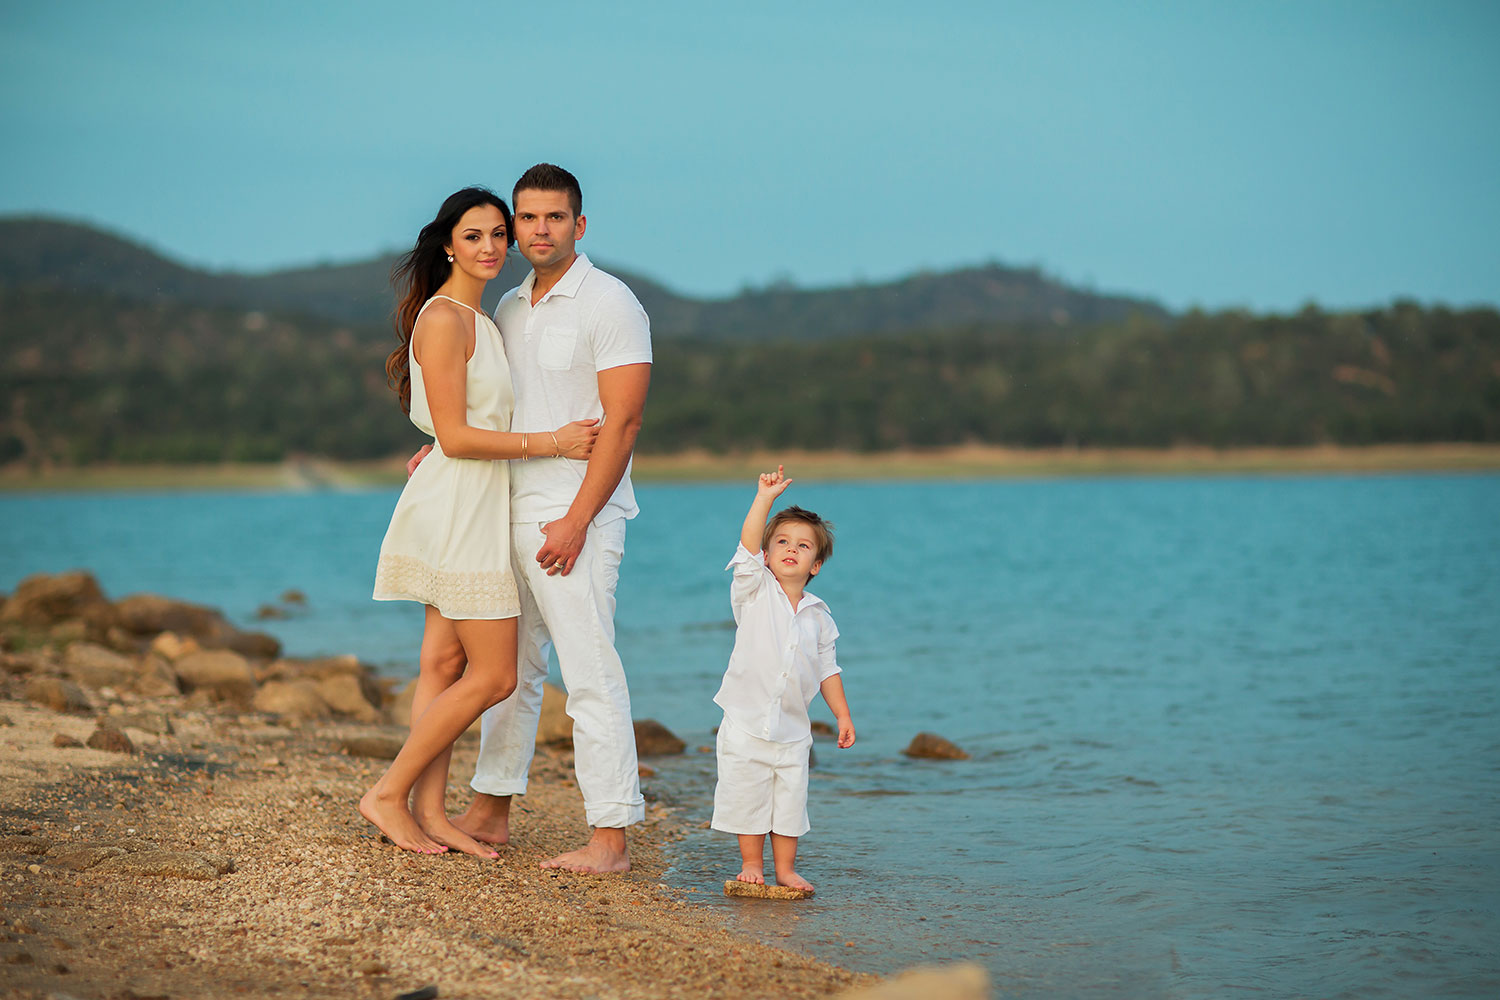 Matching-Outfits. 70+ Best Family Photoshoot Outfit Ideas That You Must Check